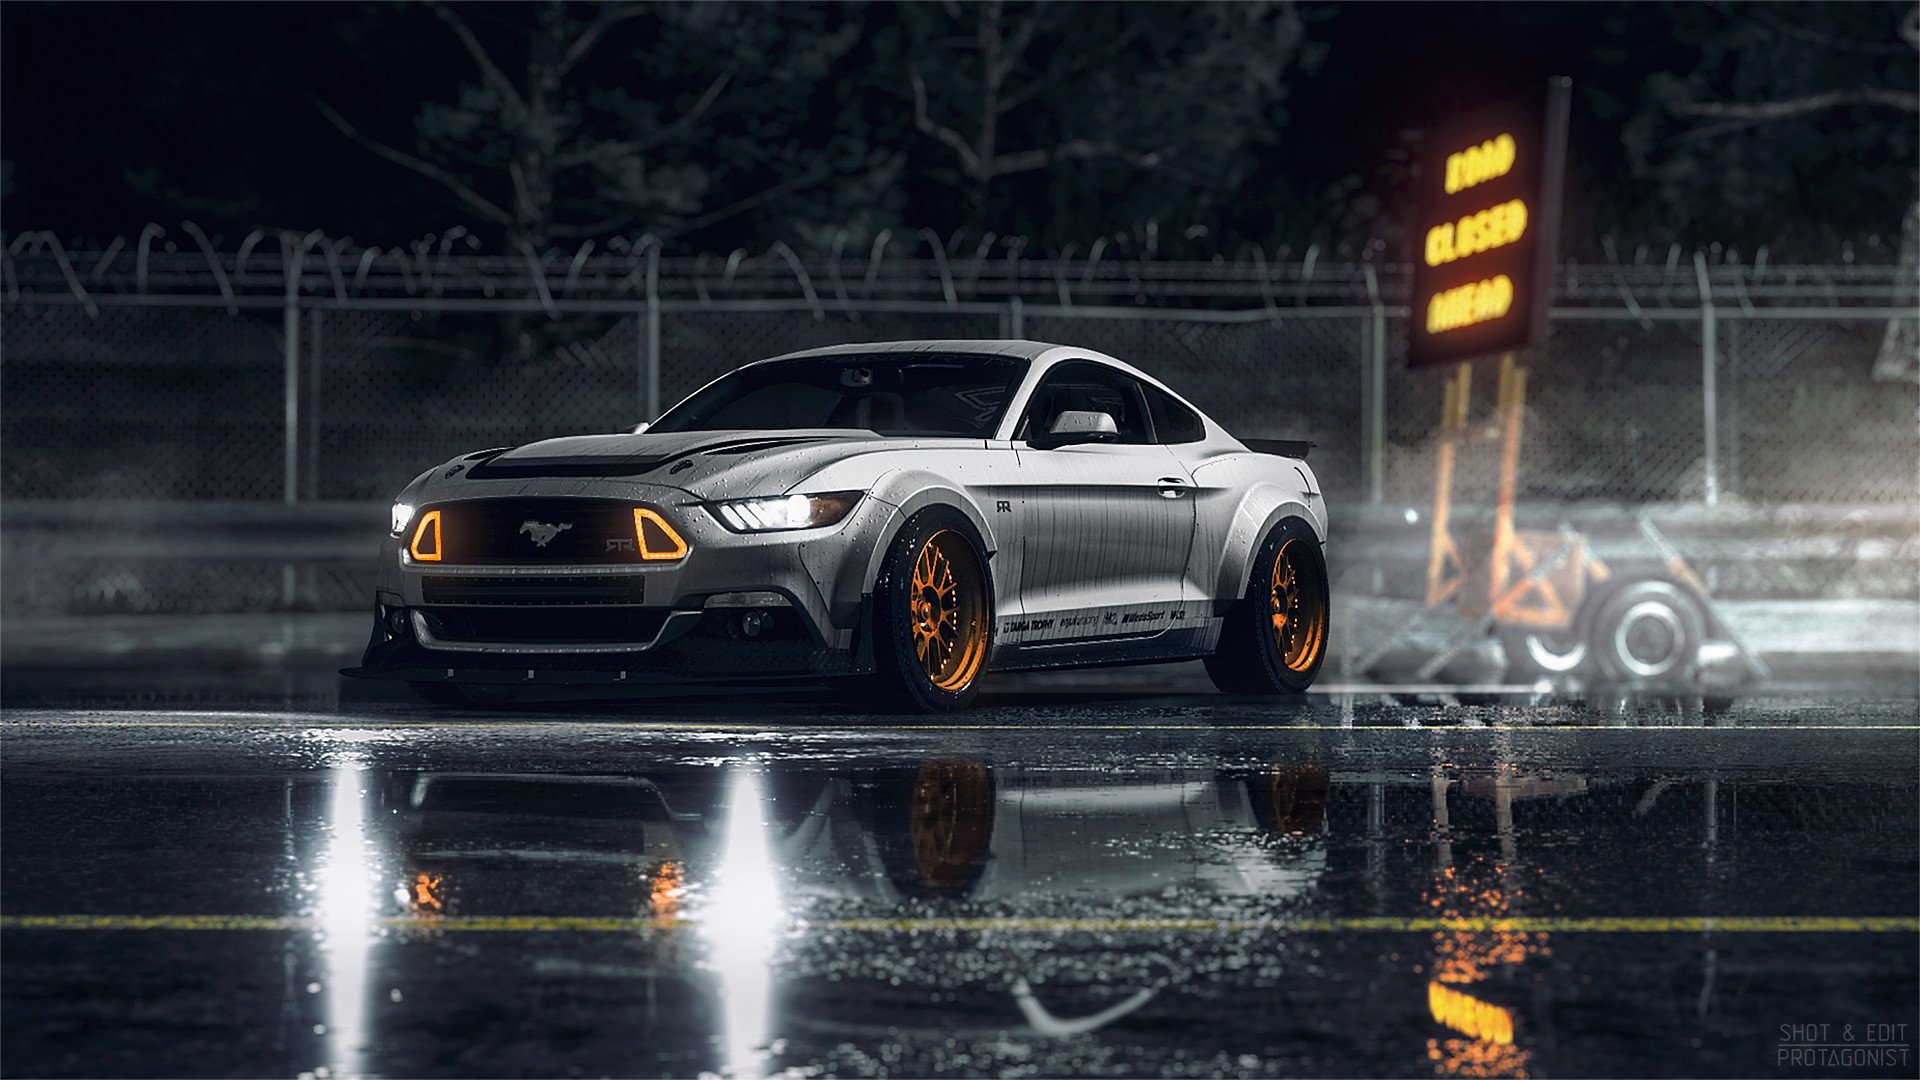 Need For Speed (NFS) wallpaper HD for desktop background